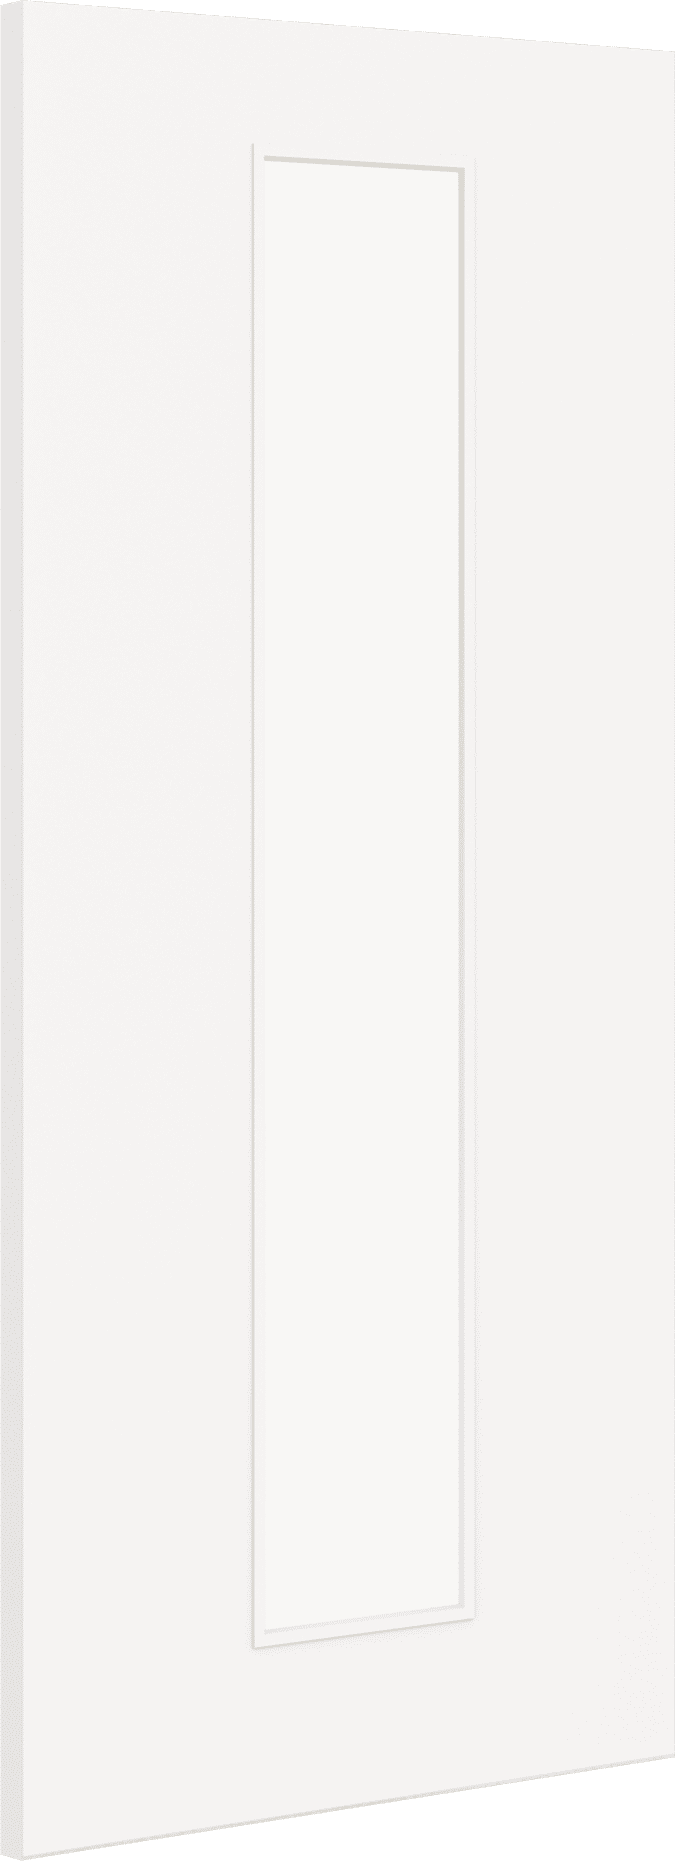 1981mm x 838mm x 44mm (33") Architectural Paint Grade White 10 Clear Glazed Fire Door Blank